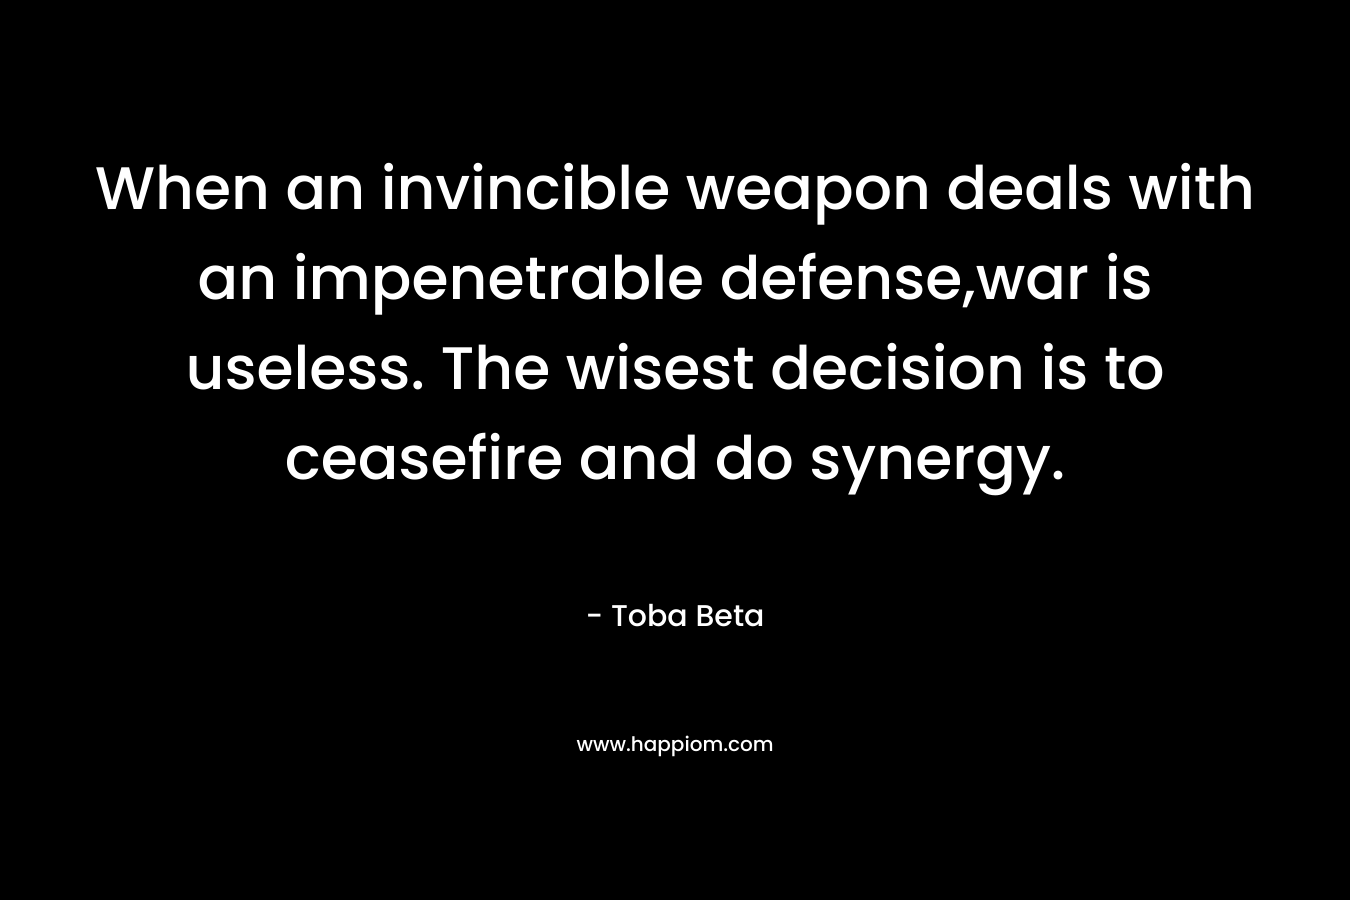 When an invincible weapon deals with an impenetrable defense,war is useless. The wisest decision is to ceasefire and do synergy.